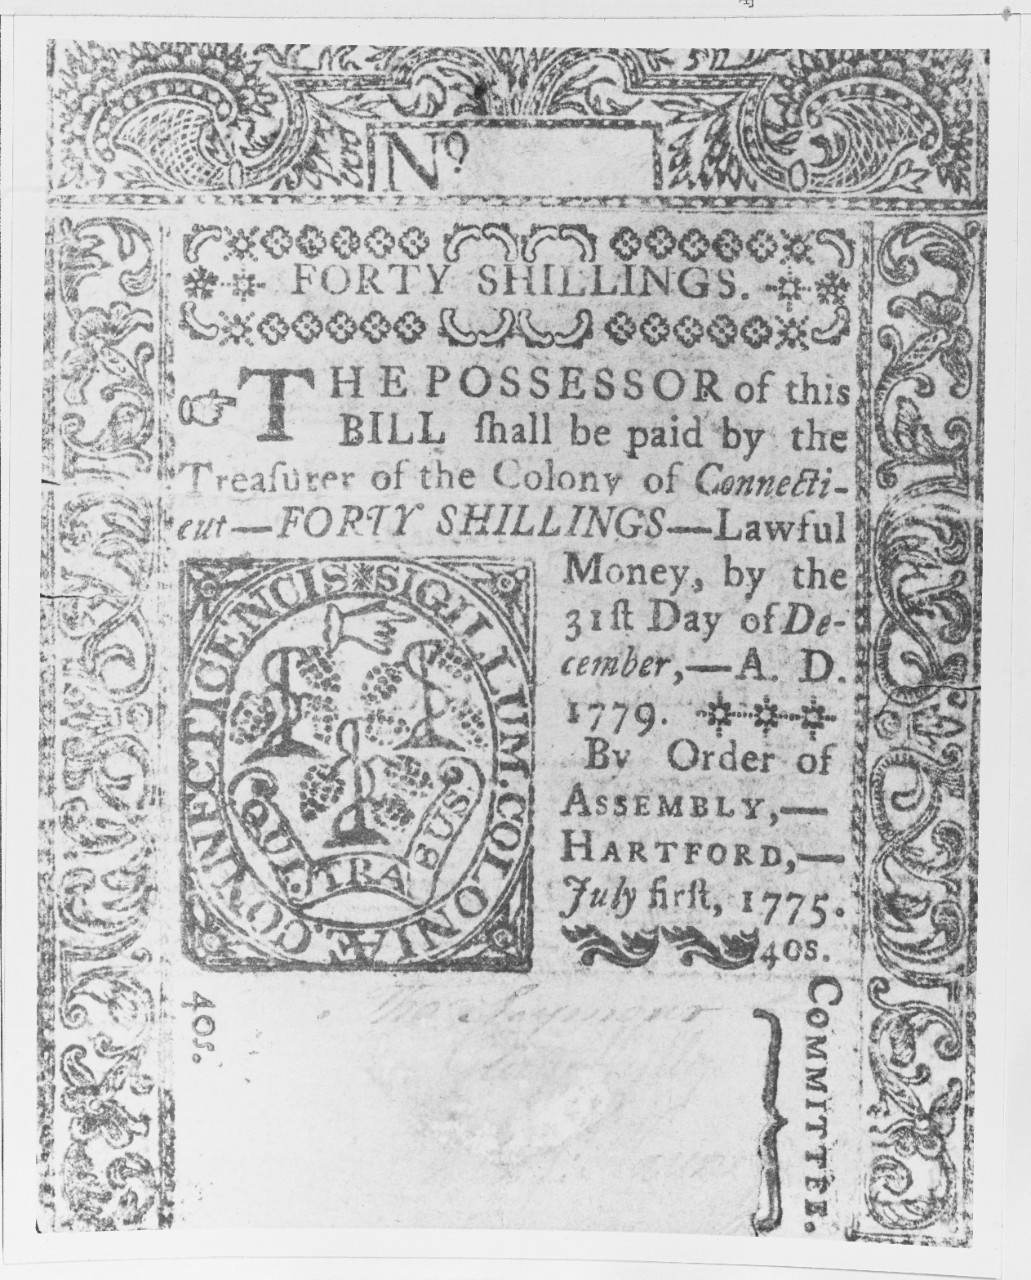 Forty shilling note